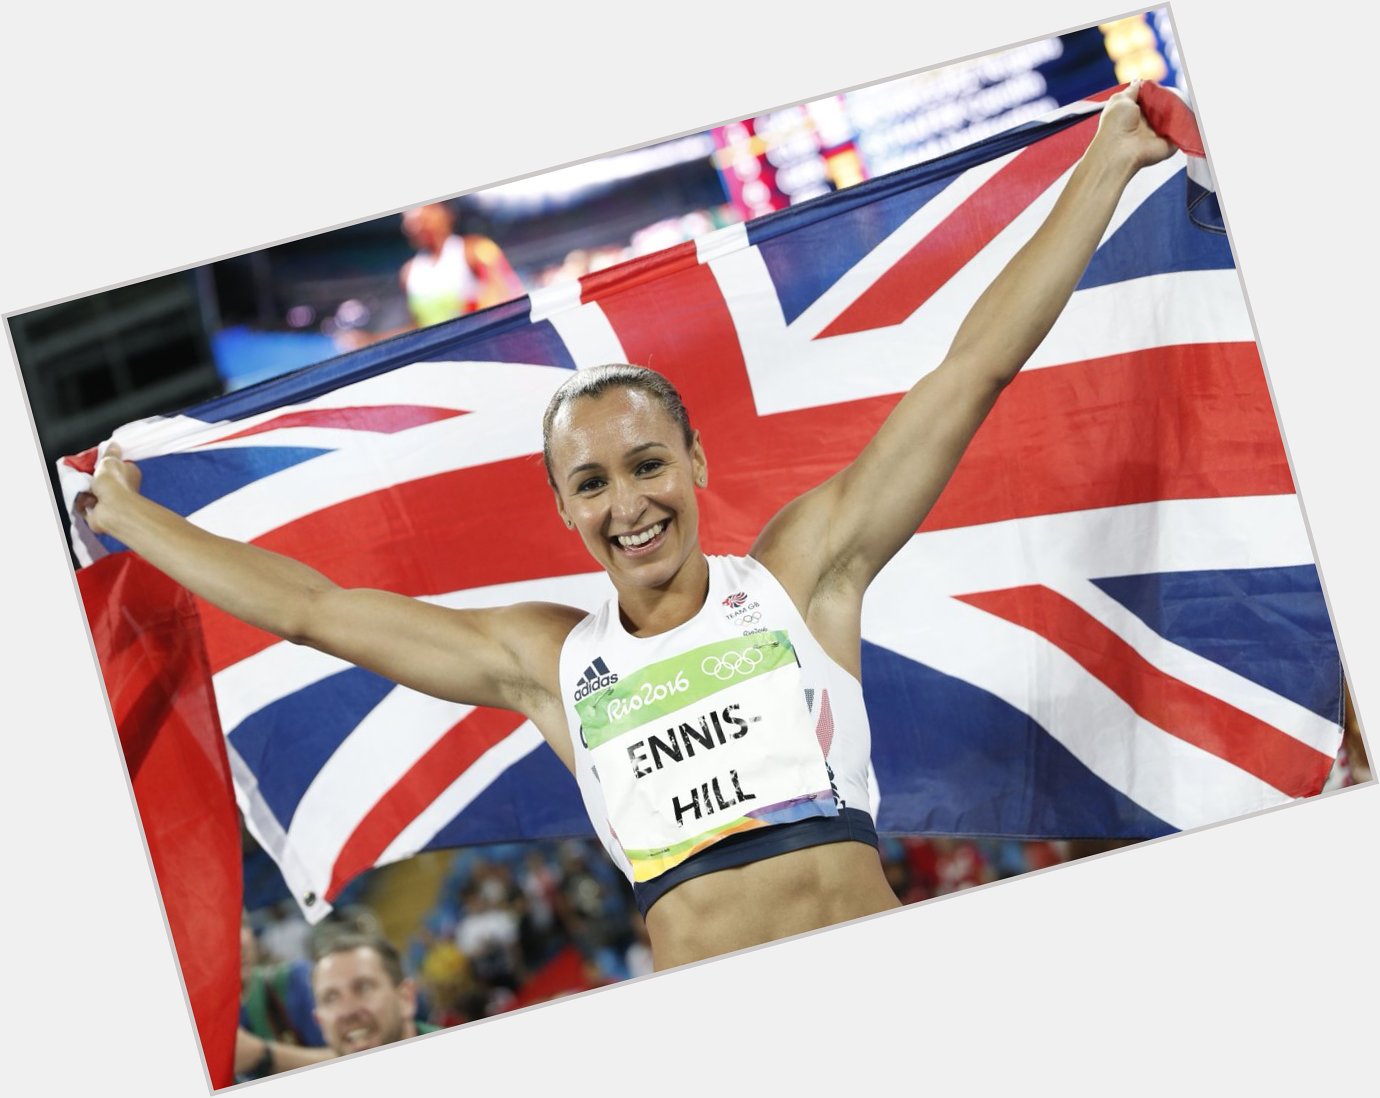 We wish a very happy birthday to Jessica Ennis-Hill. 